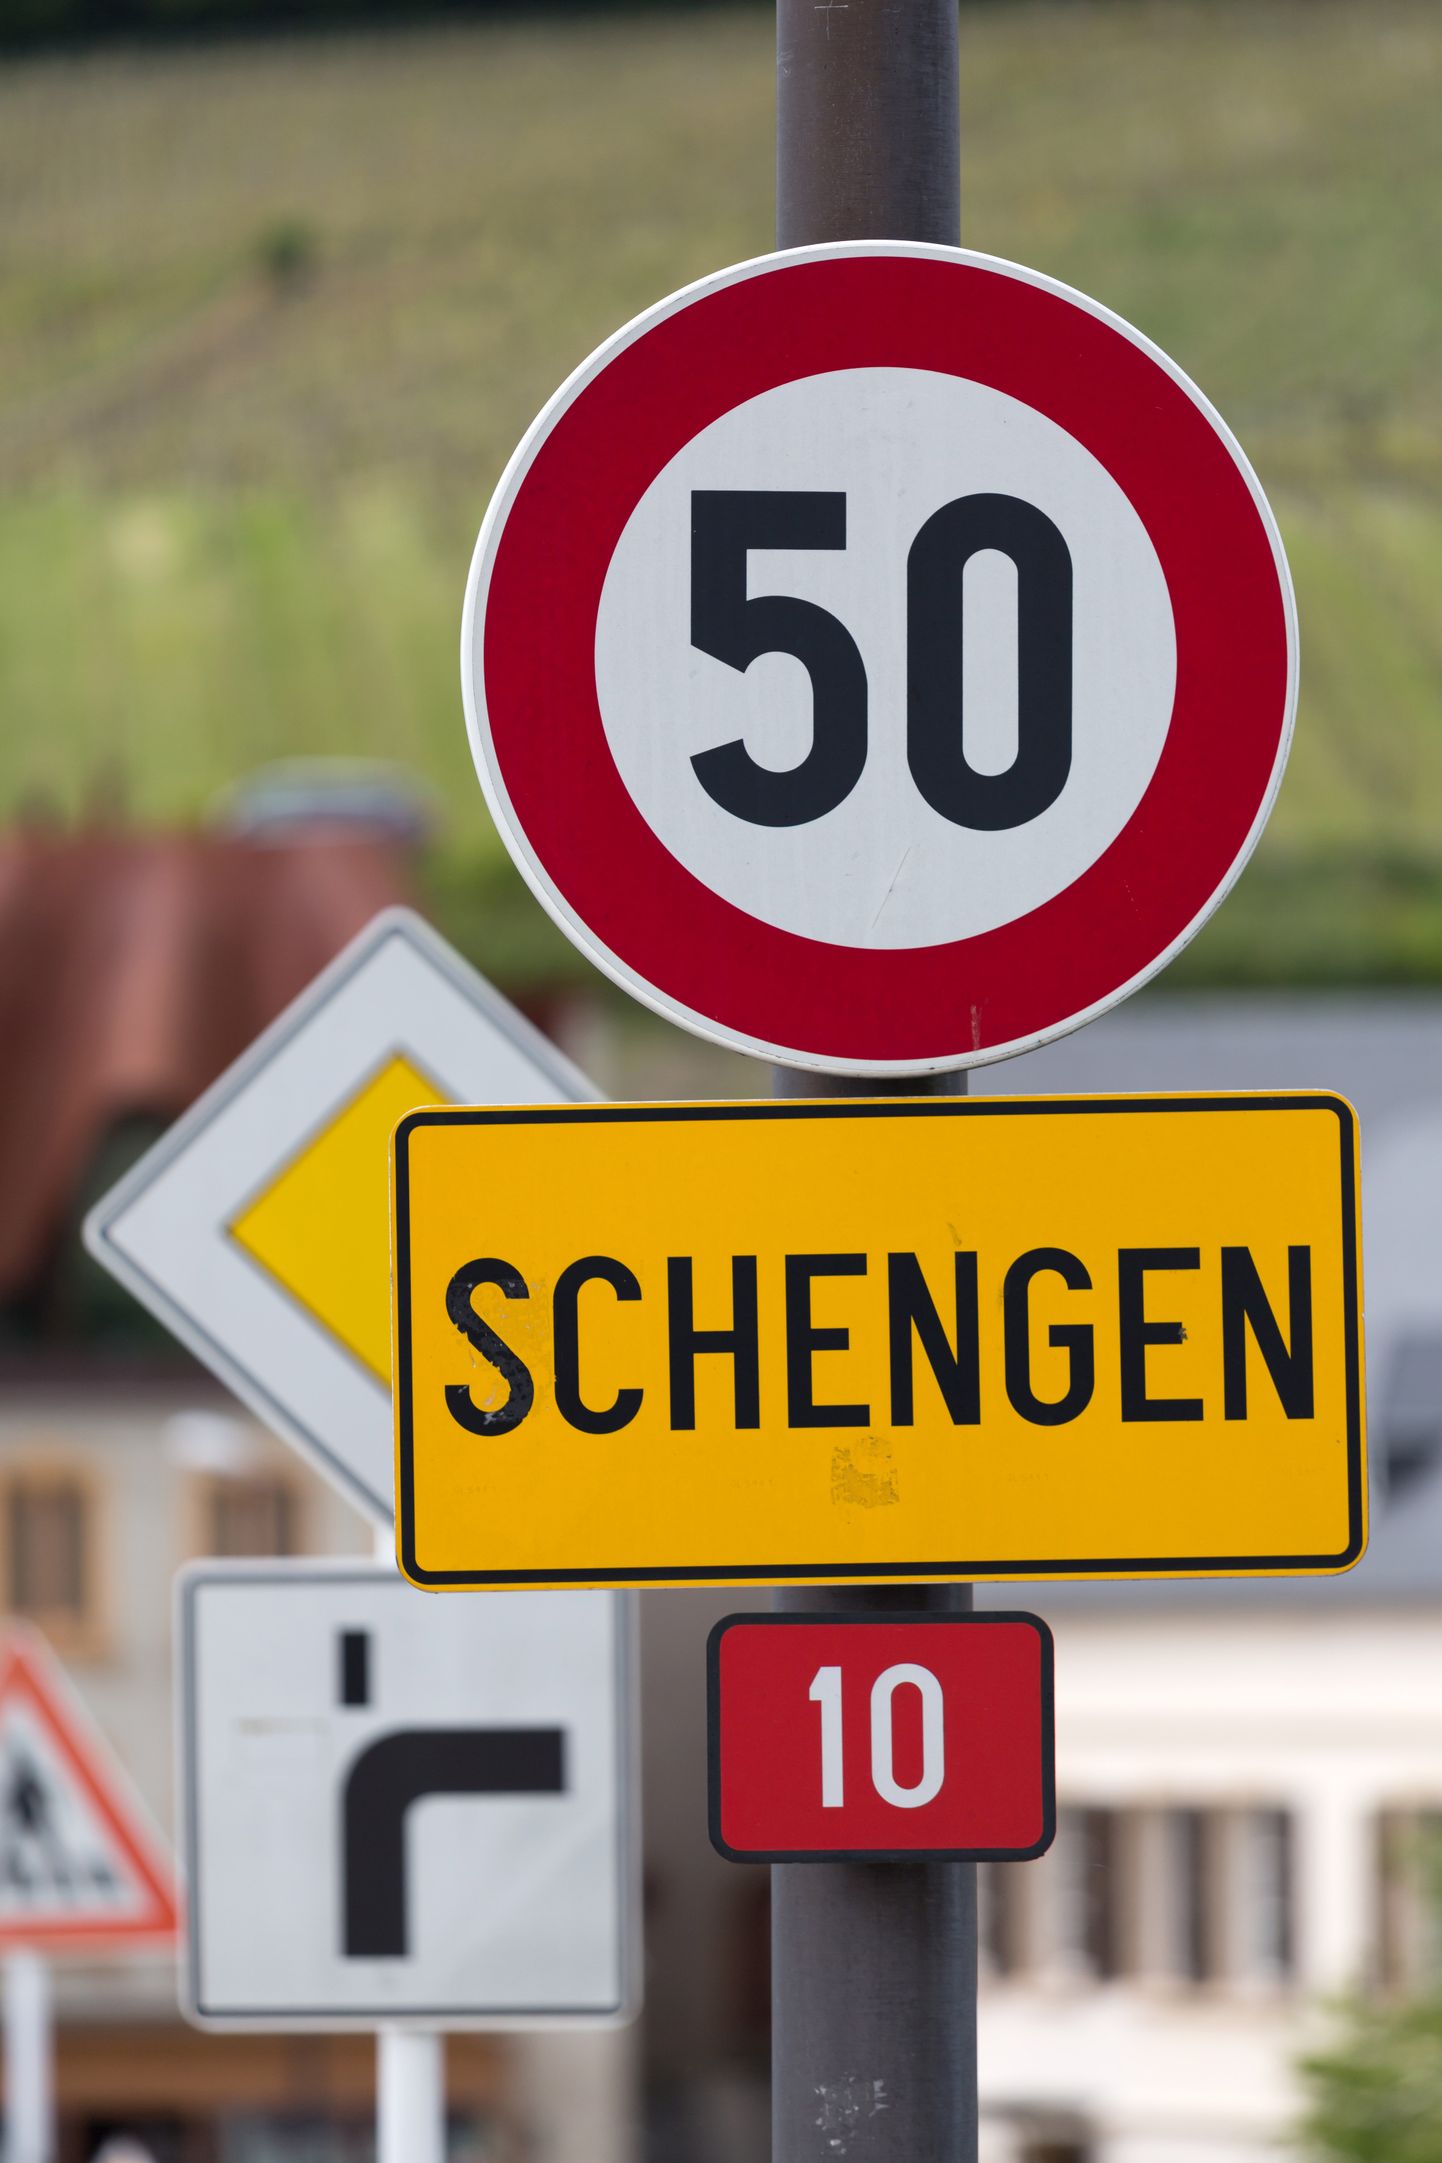 02.05.2018, Schengen, Canton Remich, Luxembourg - Schengen place-name sign on the Mosel bridge. View from the direction of the open border to Germany. 00A180502D039CAROEX.JPG [MODEL RELEASE: NOT APPLICABLE, PROPERTY RELEASE: NOT APPLICABLE (c) caro images / Teich, http://www.caro-images.com, info@caro-images.com - In case of using the picture for any non-editorial purpose, please contact the agency - the picture is subject to royalty!]